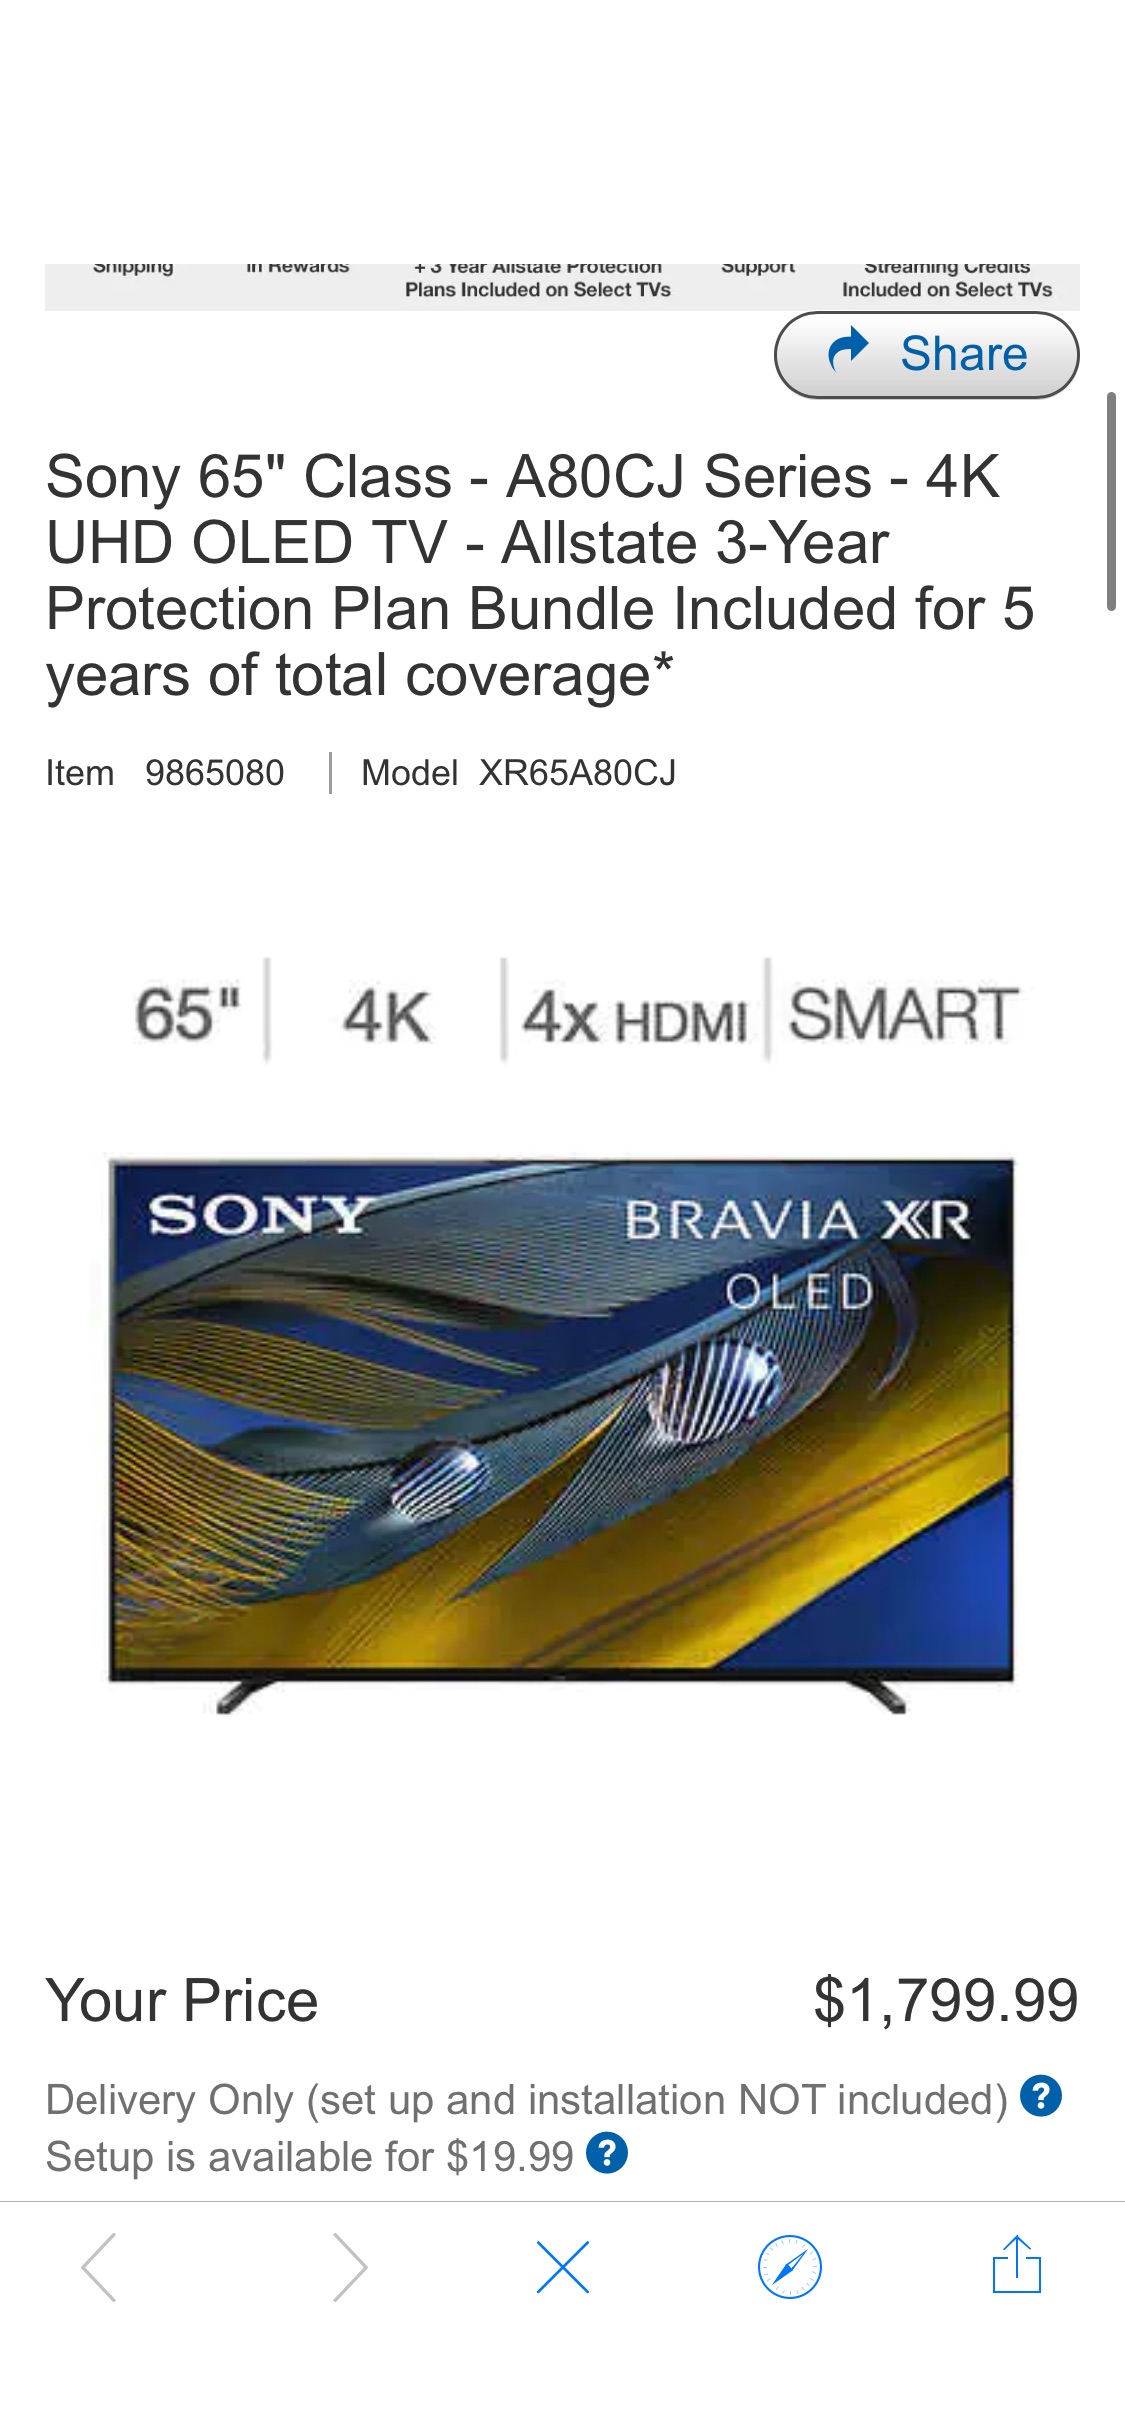 Sony 65" Class - A80CJ Series - 4K UHD OLED TV - Allstate 3-Year Protection Plan Bundle Included for 5 years of total coverage* | Costco为